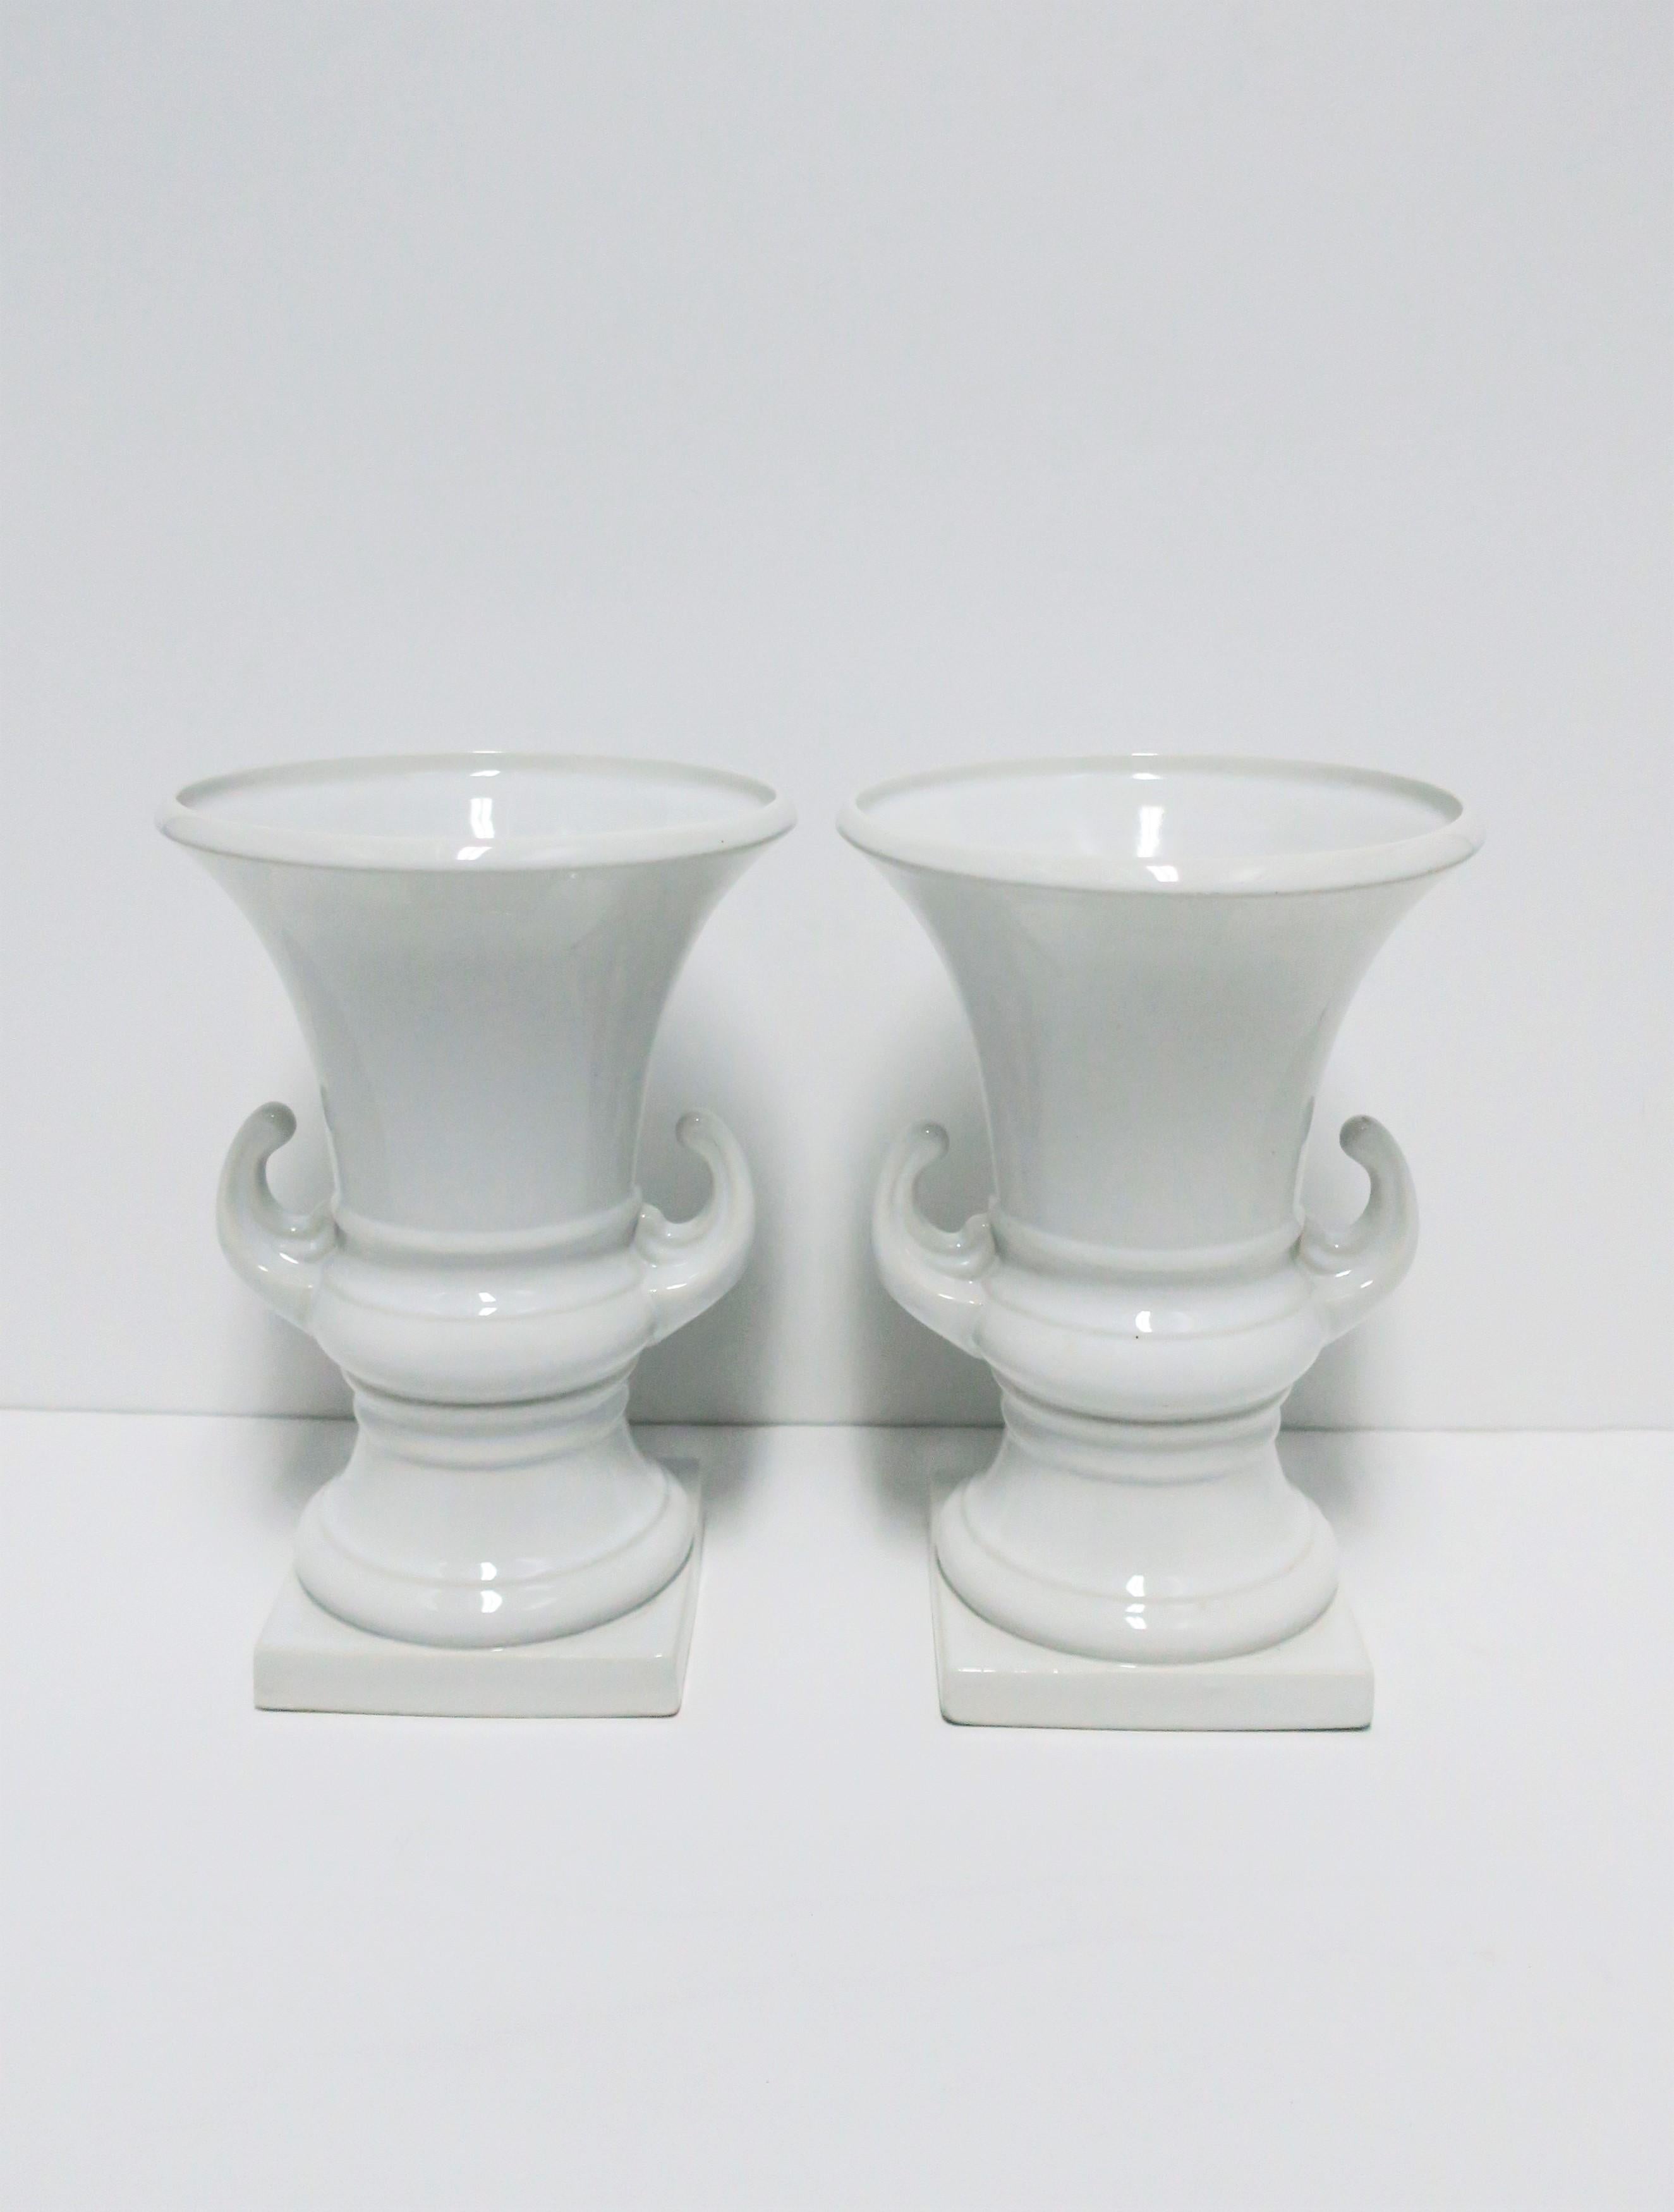 Italian White Ceramic Urns Neoclassical Style, Pair In Good Condition For Sale In New York, NY